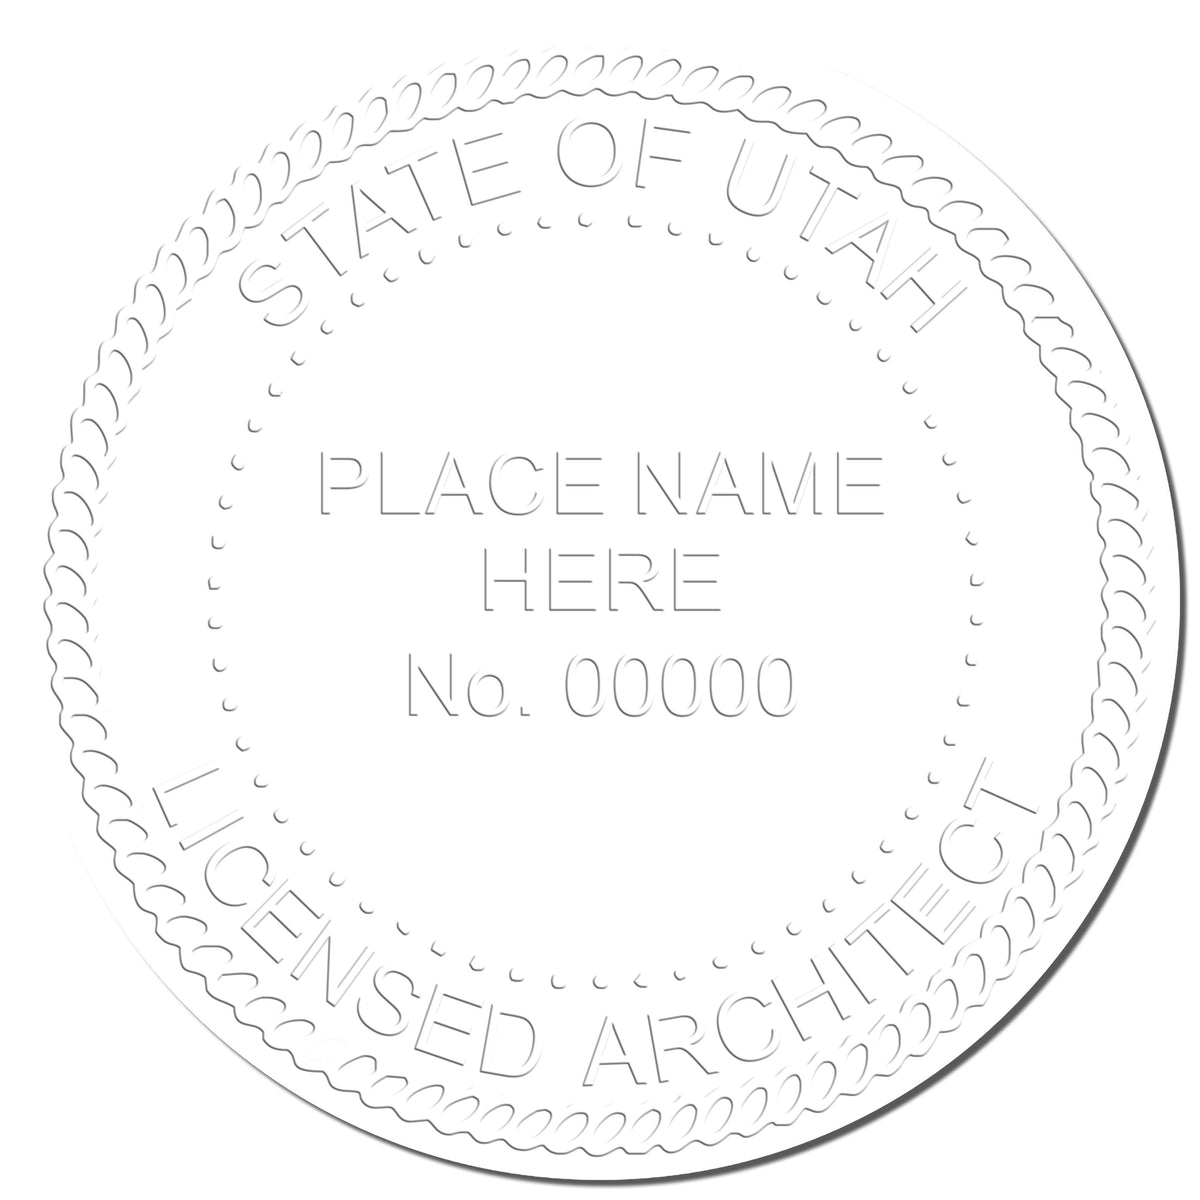 A photograph of the Utah Desk Architect Embossing Seal stamp impression reveals a vivid, professional image of the on paper.